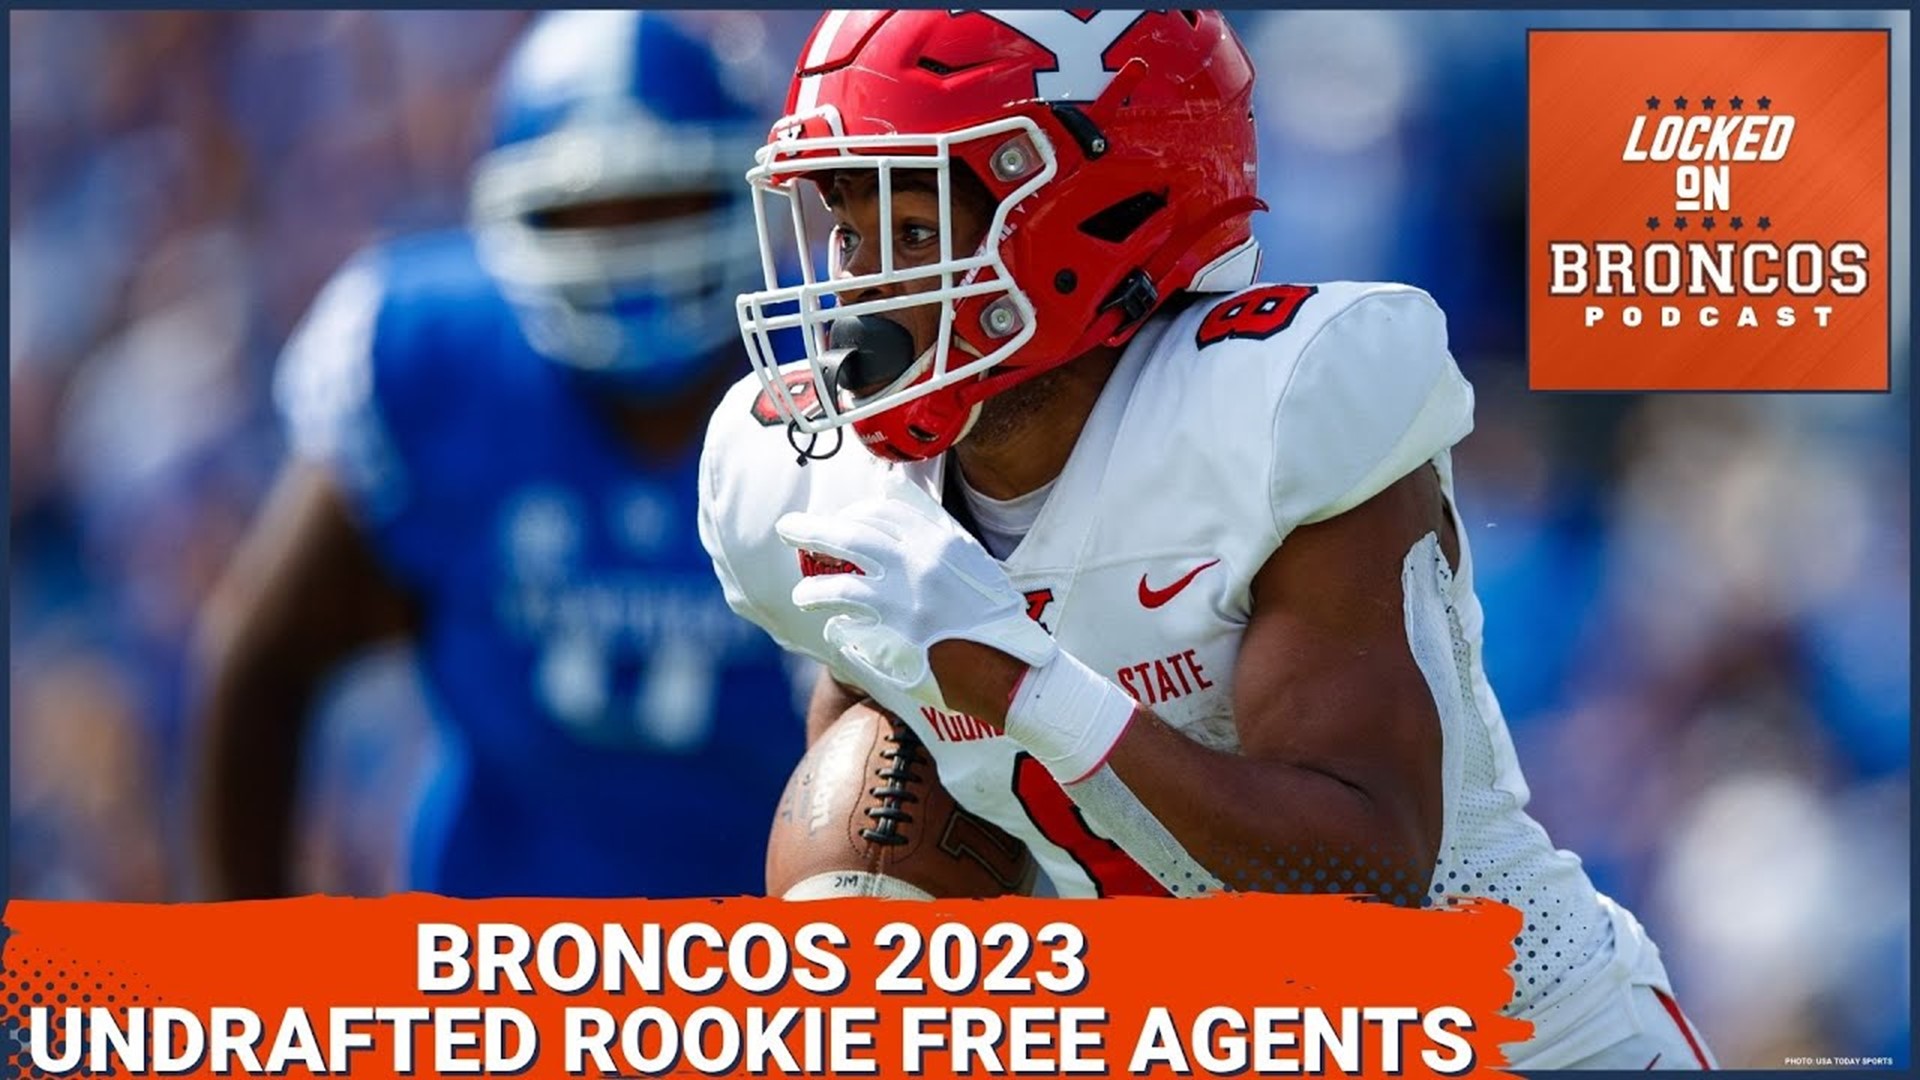 Denver Broncos finalize their 2023 undrafted rookie free agents